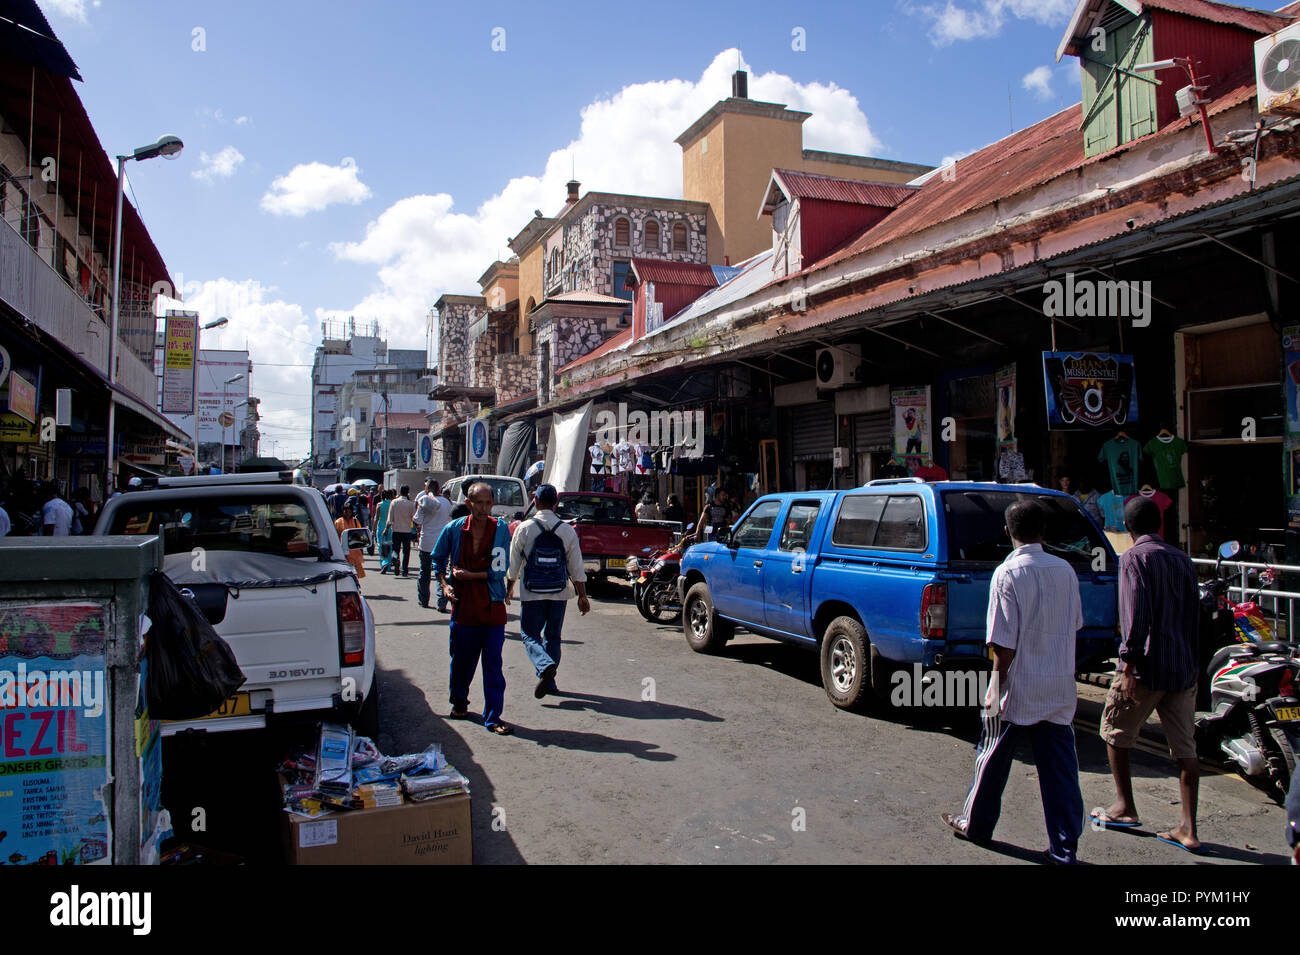 Street scence in Port Louis, Mauritius Stock Photo